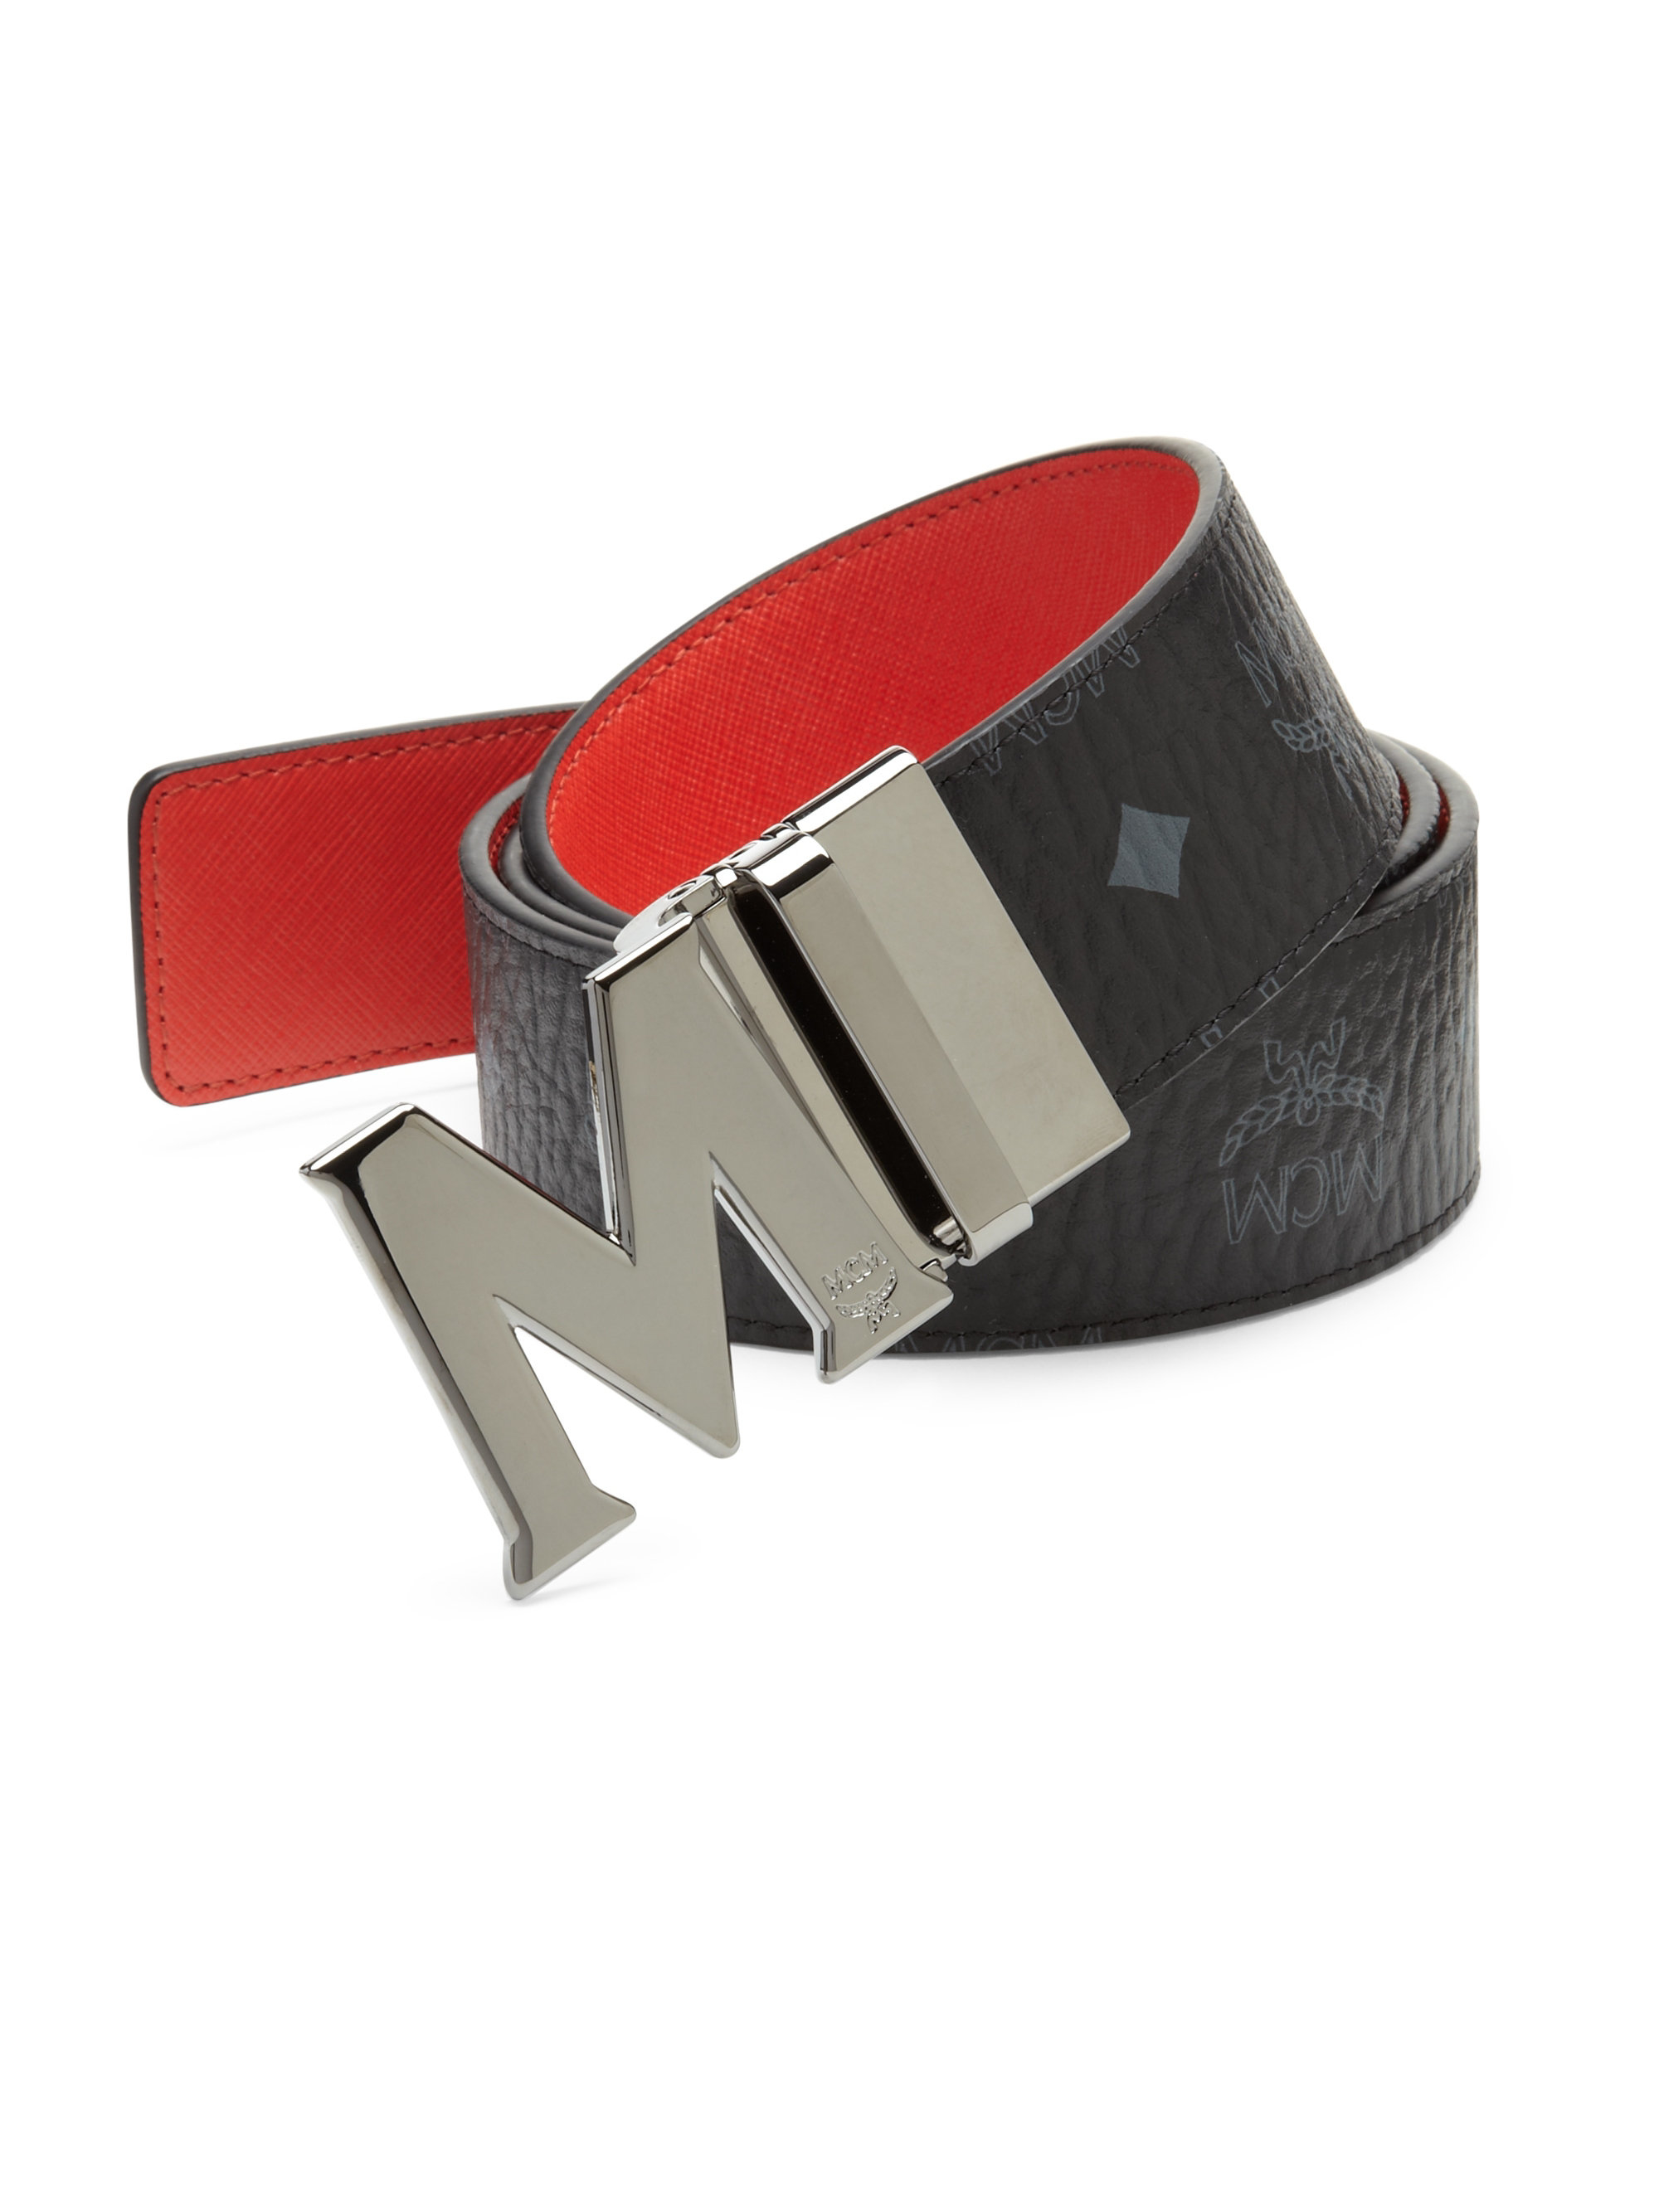 Lyst - Mcm Two-toned Reversible Leather Belt in Black for Men